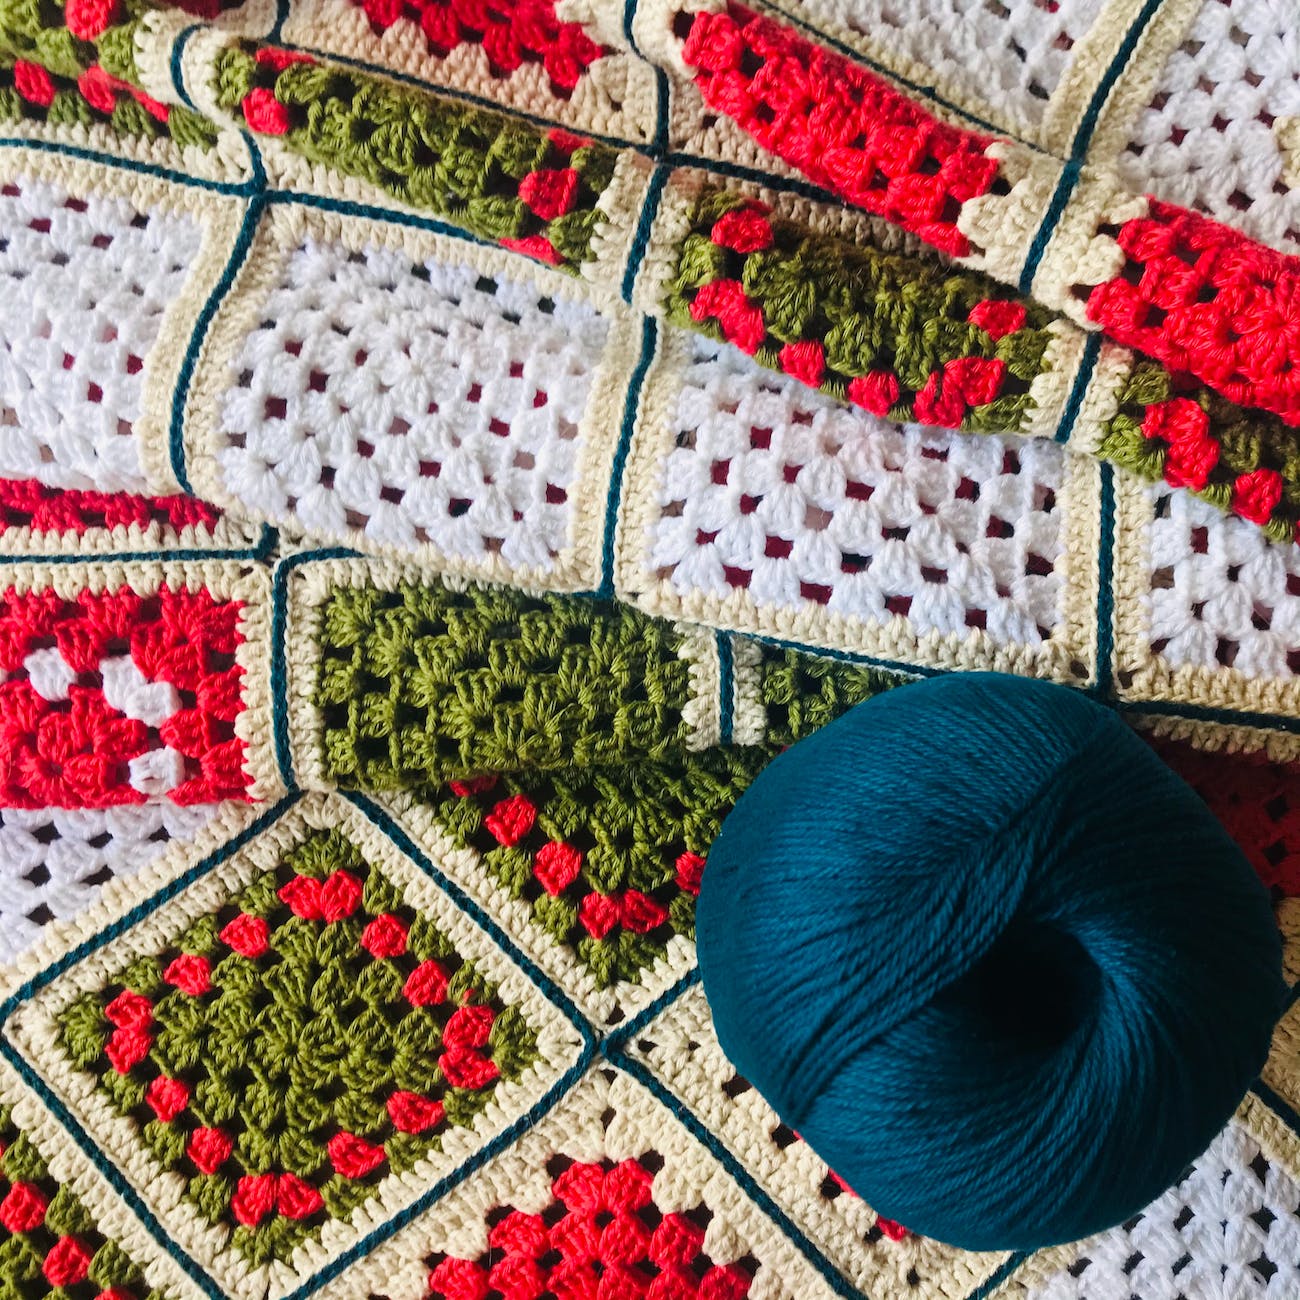 Crochet Granny Squares Pattern: Endless Possibilities and Design Variations